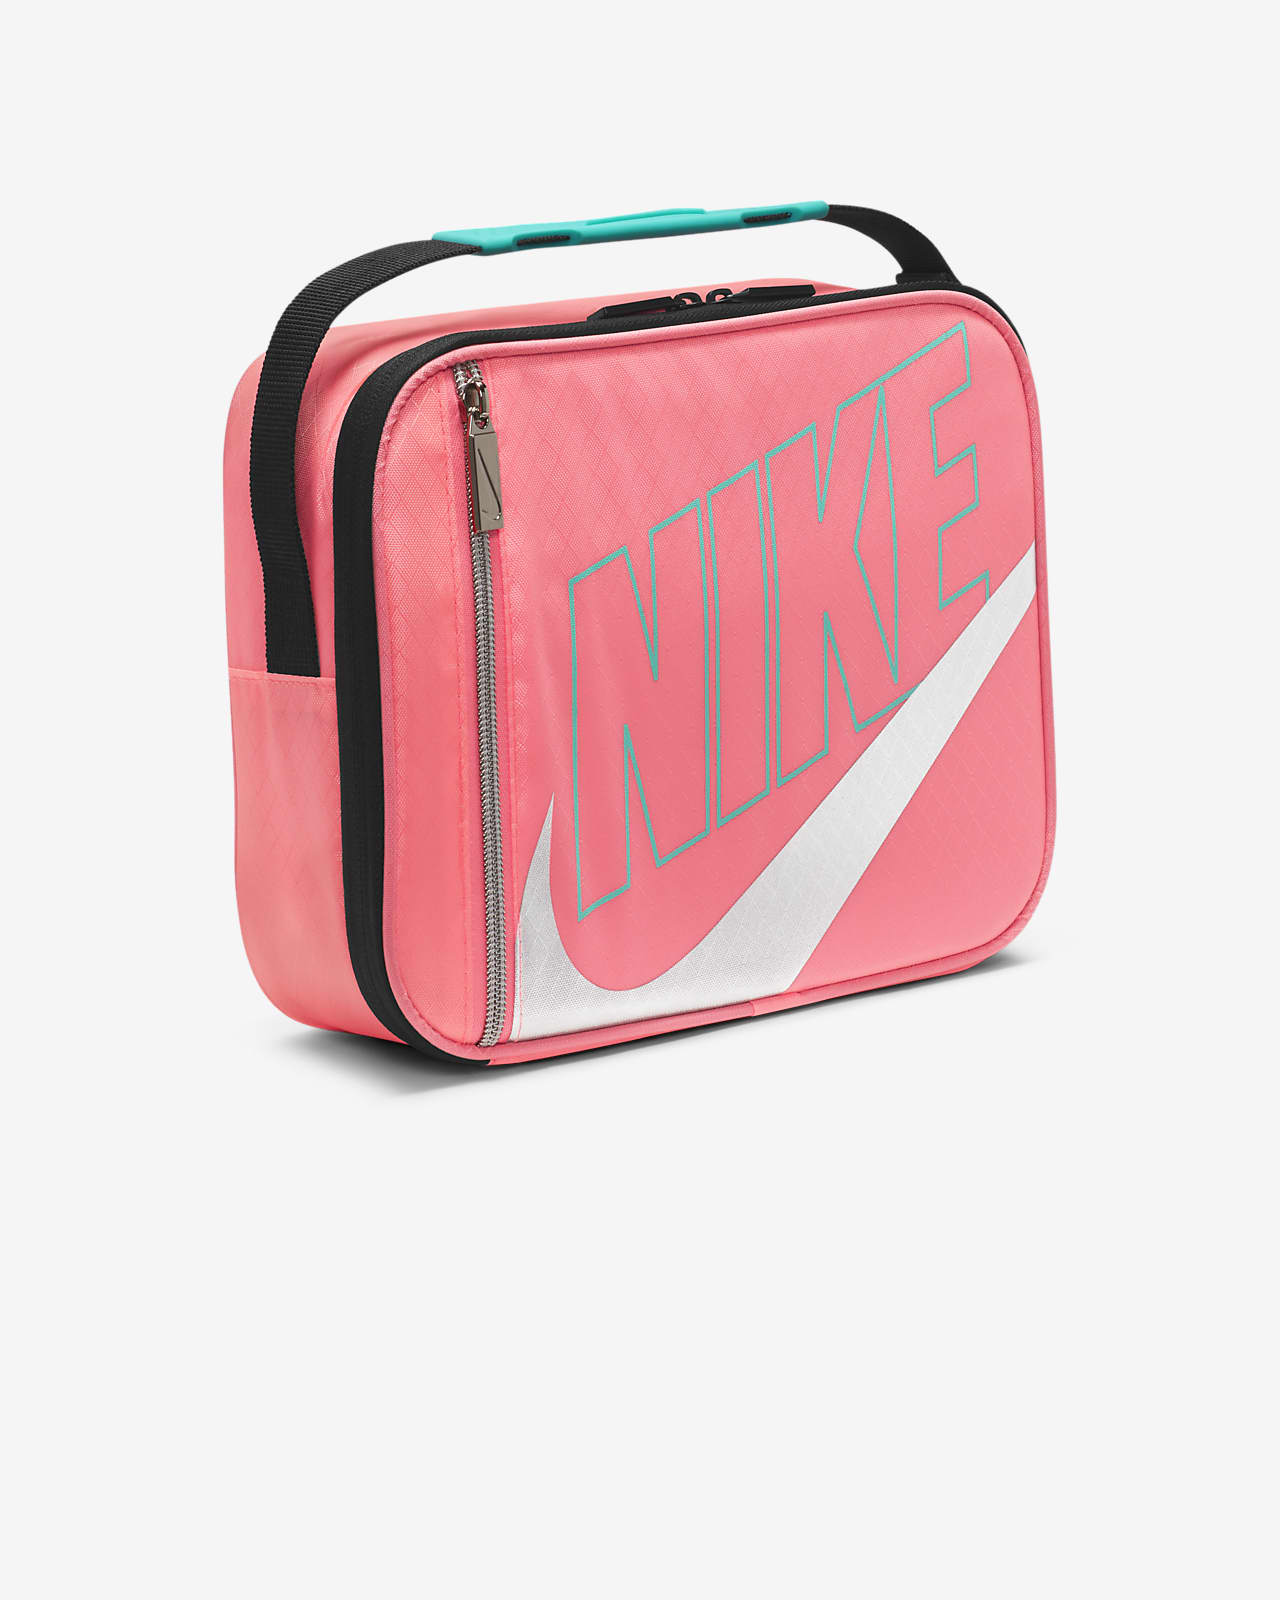 Nike Futura Fuel Pack Lunch Tote